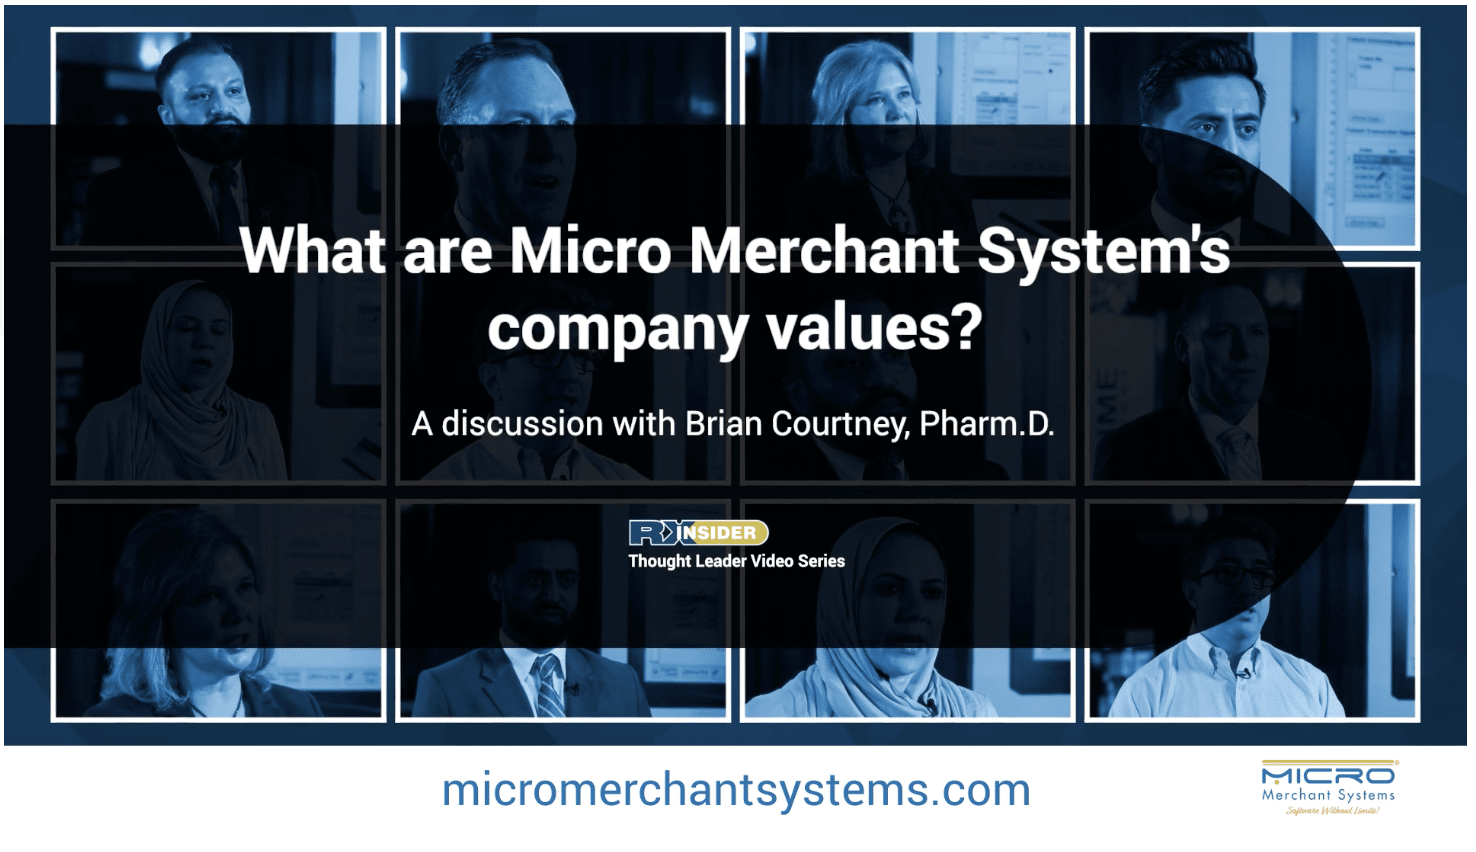 What are micro merchant system's company values